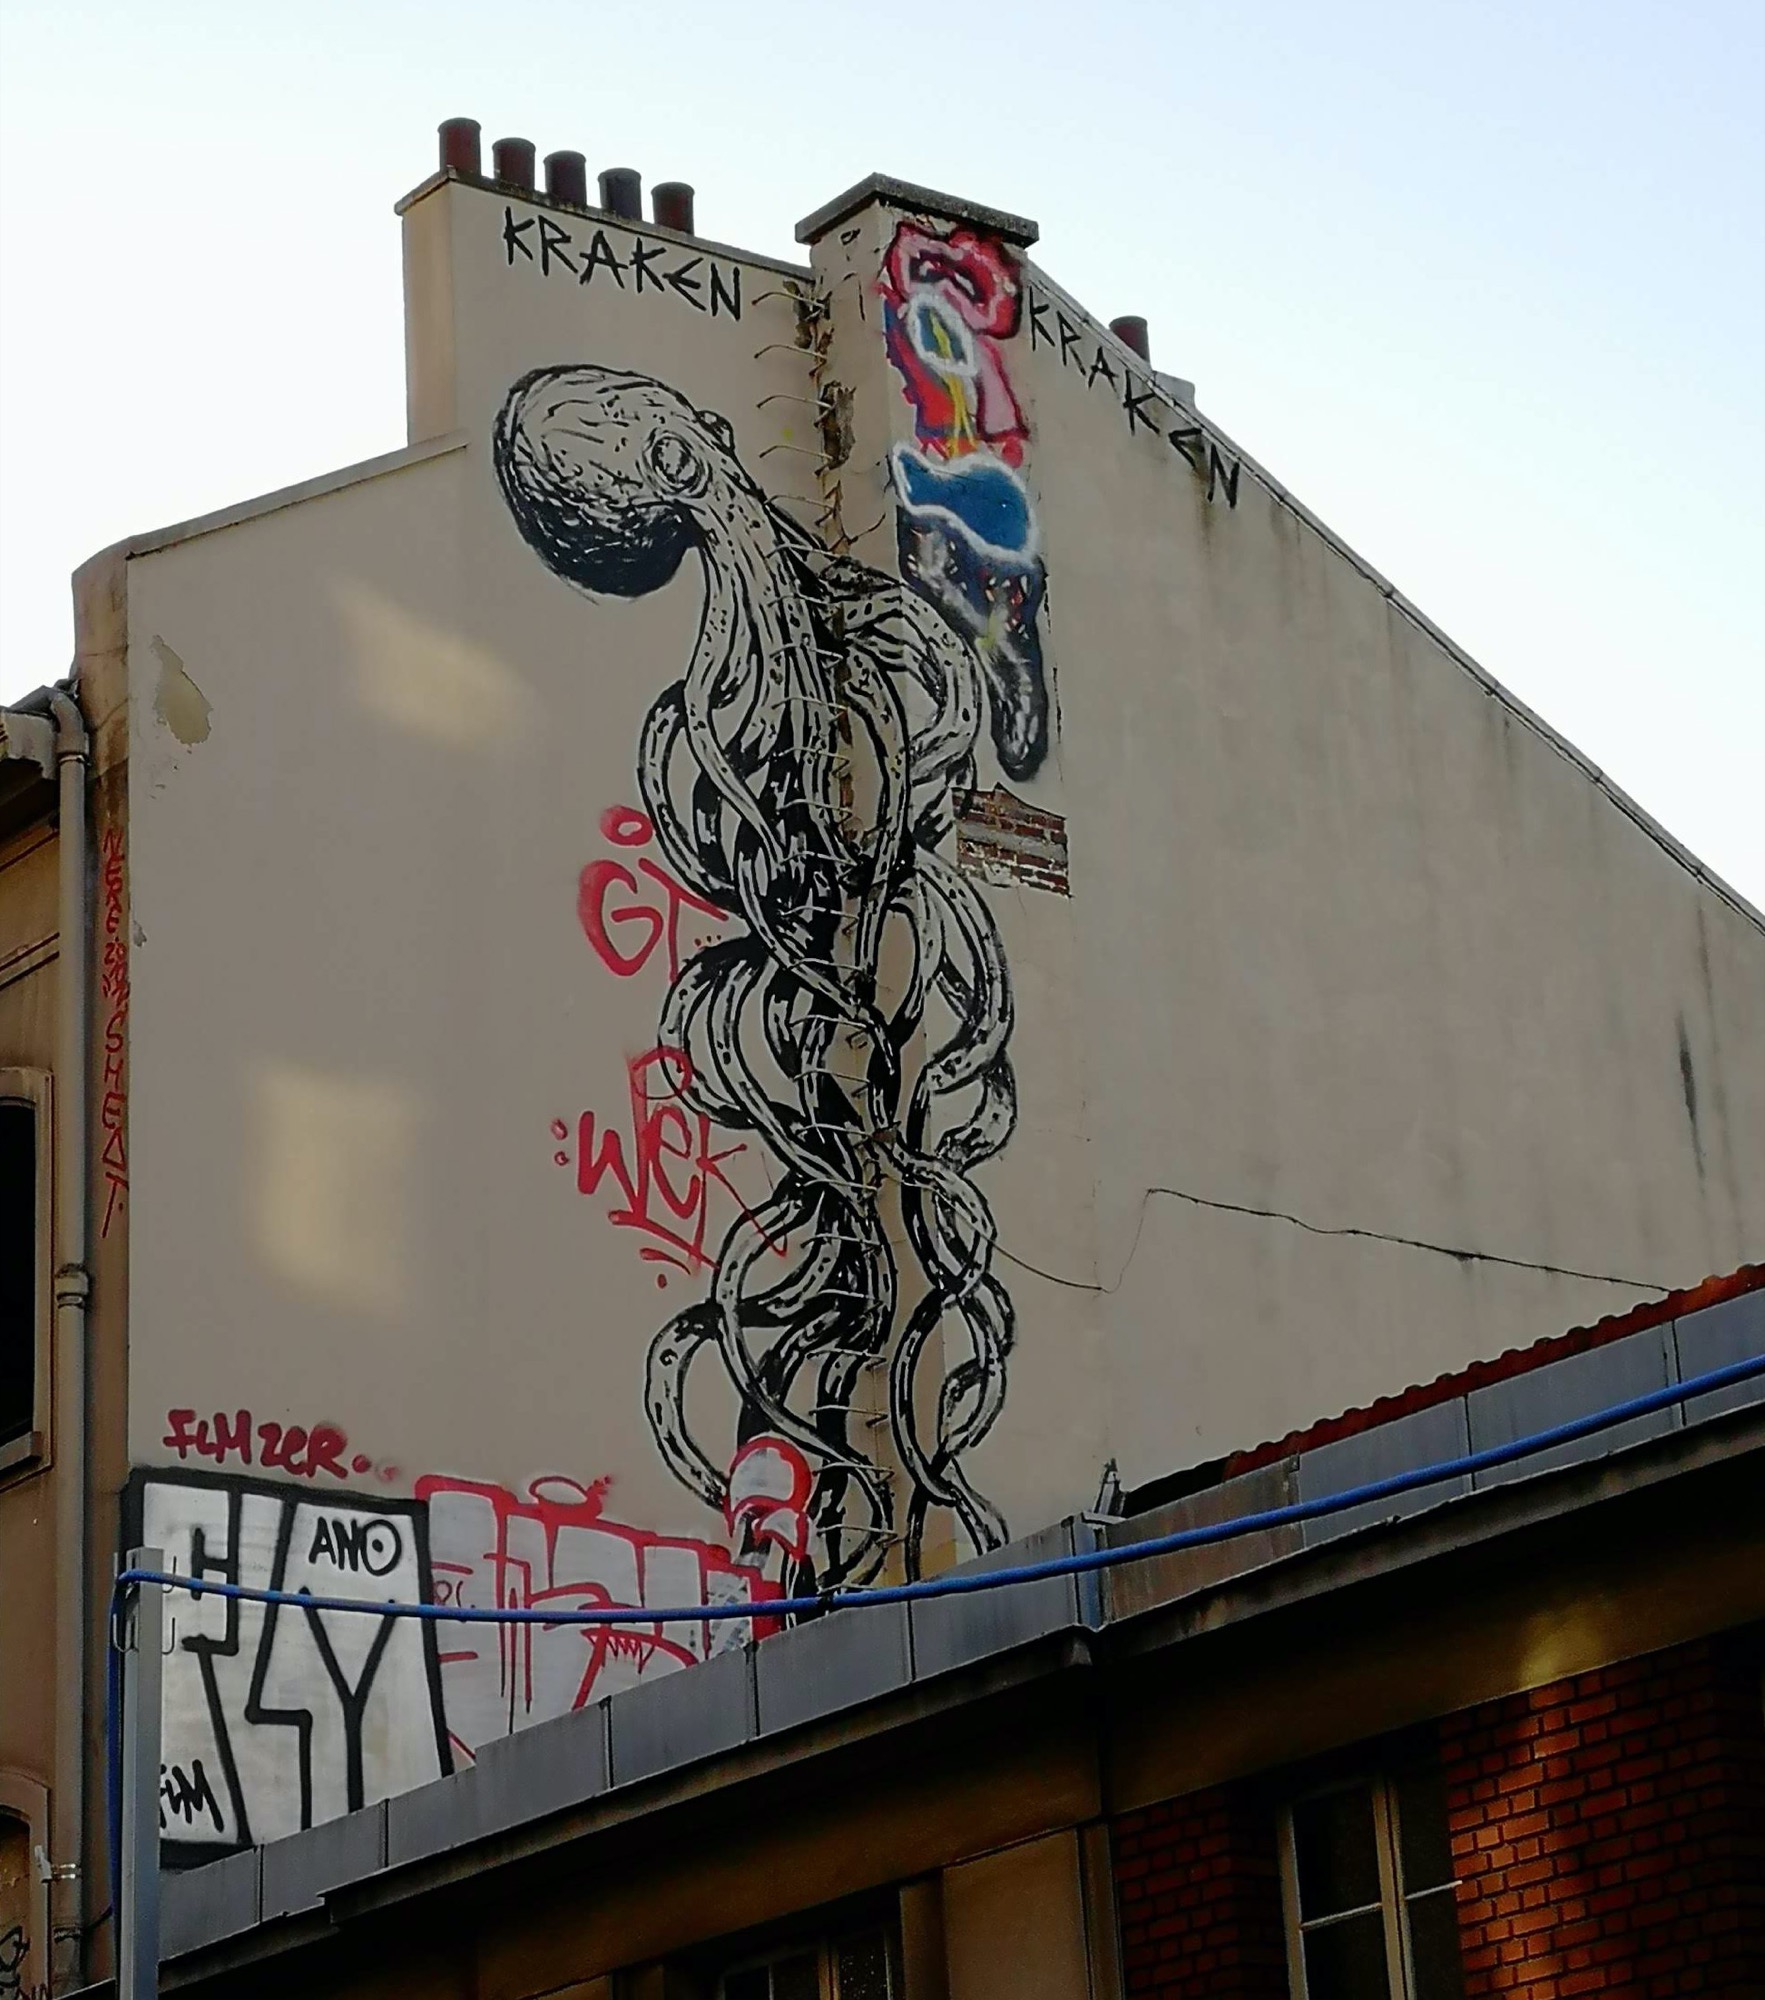 Graffiti 669  captured by Rabot in Paris France